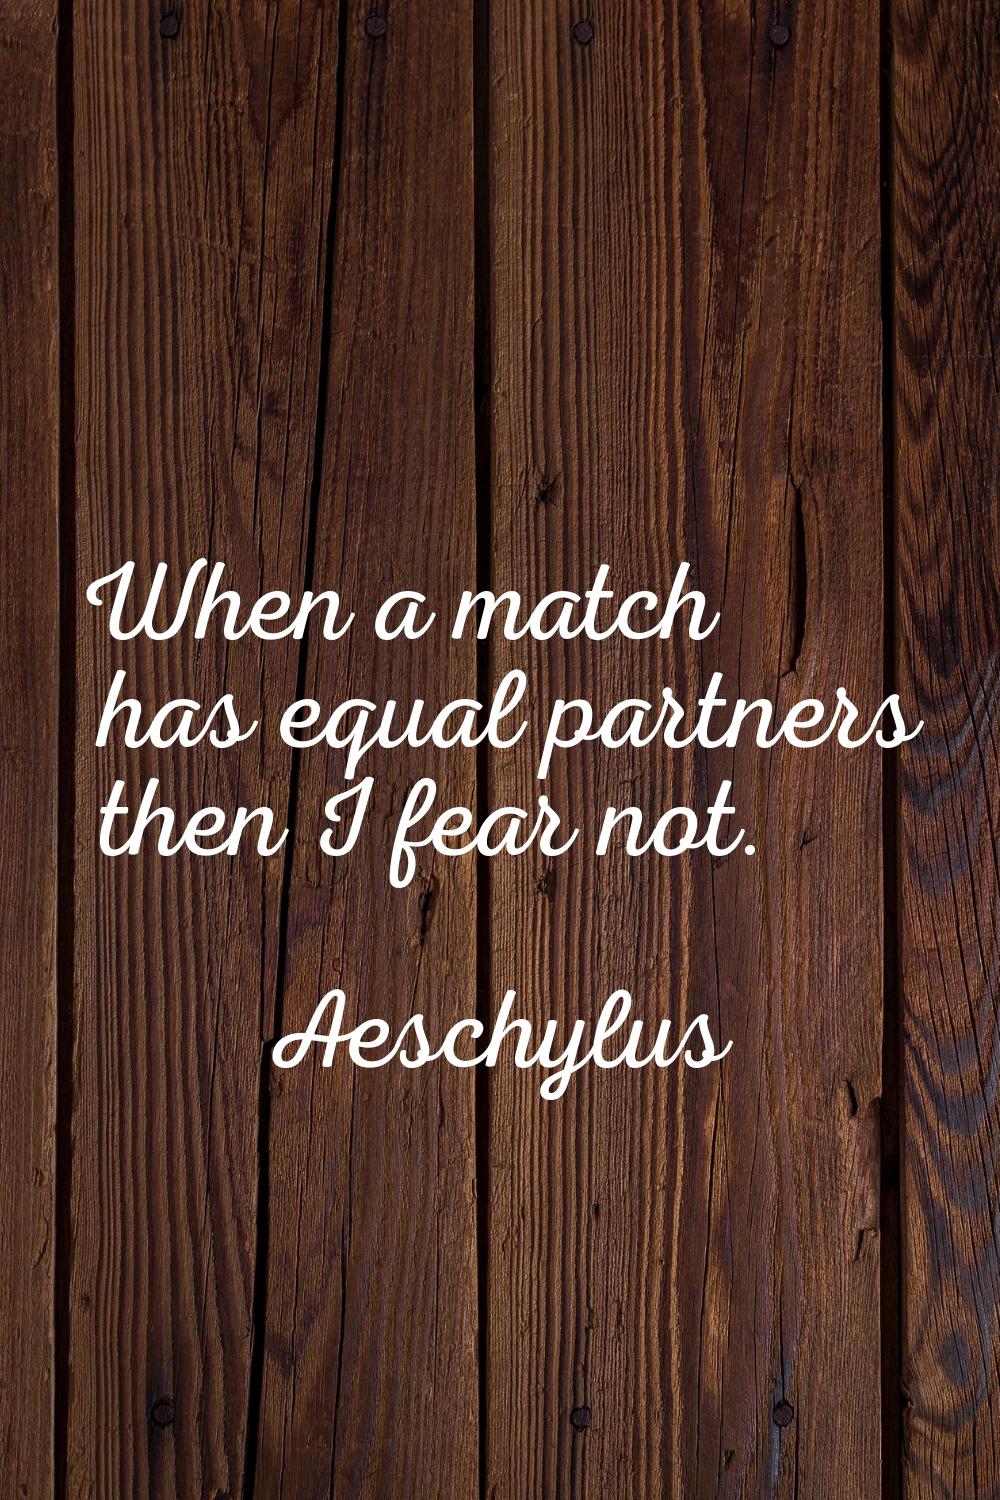 When a match has equal partners then I fear not.